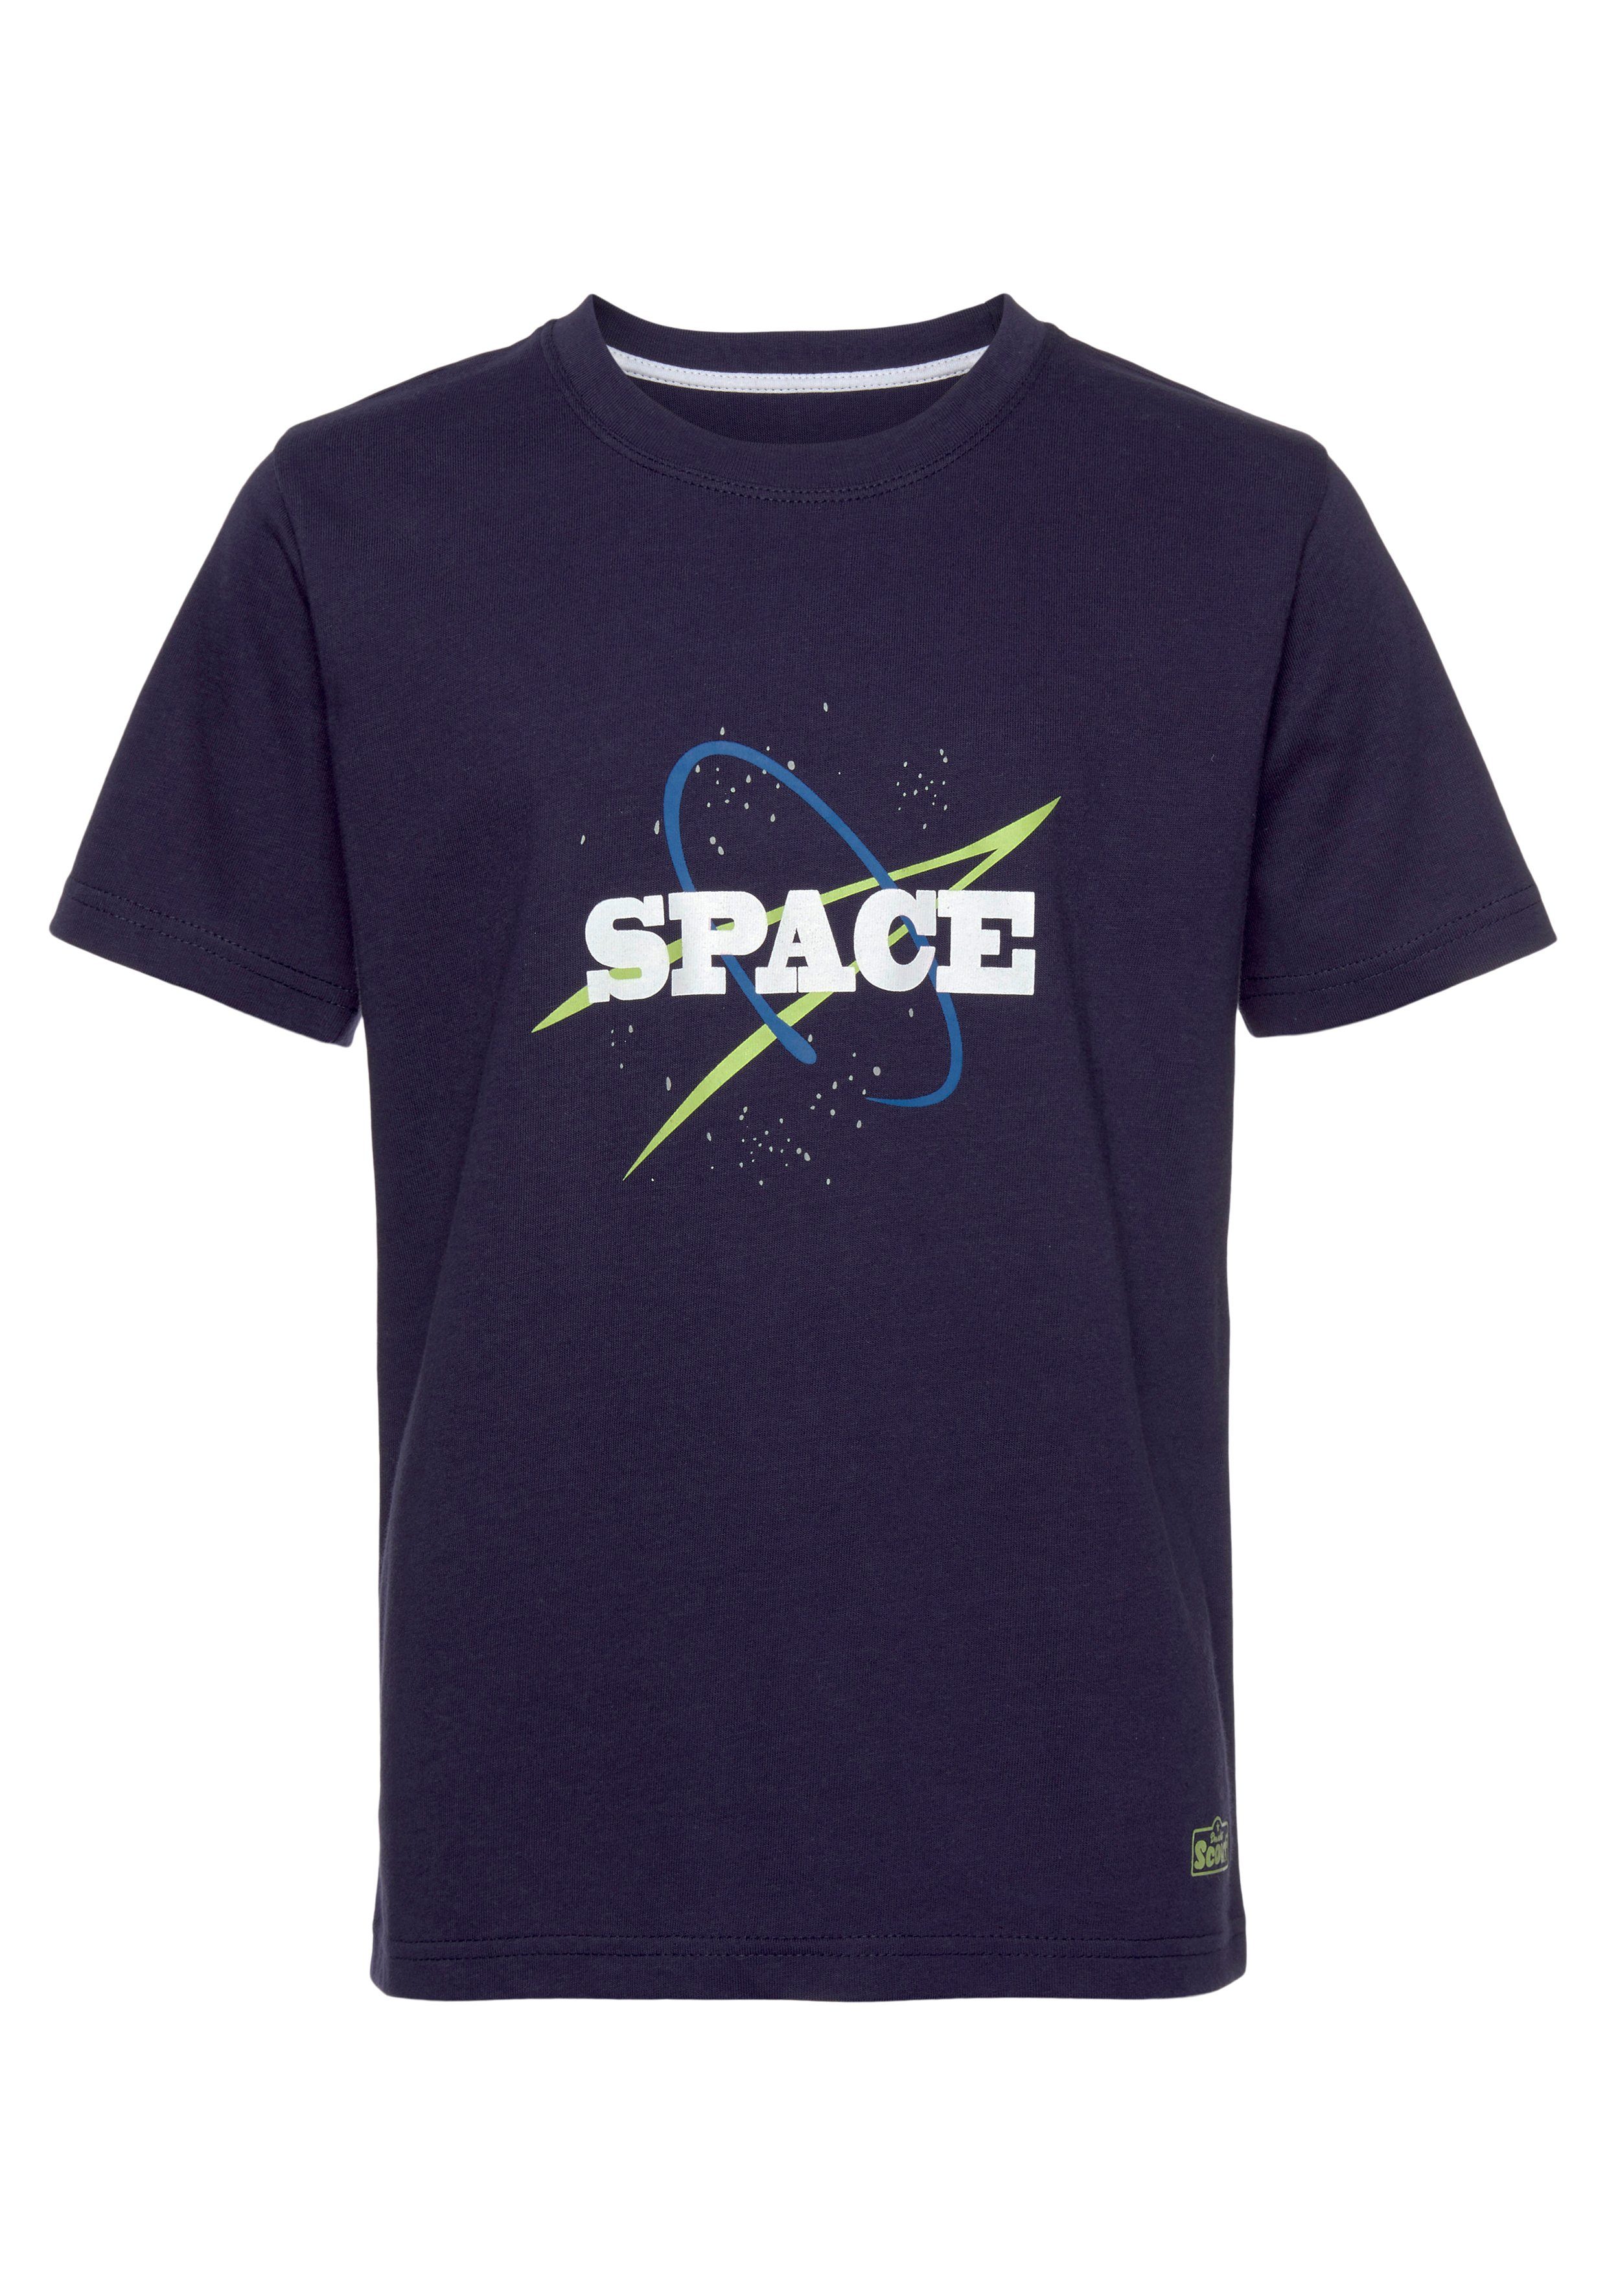 Scout T-Shirt SPACE 2er-Pack) Bio-Baumwolle (Packung, aus